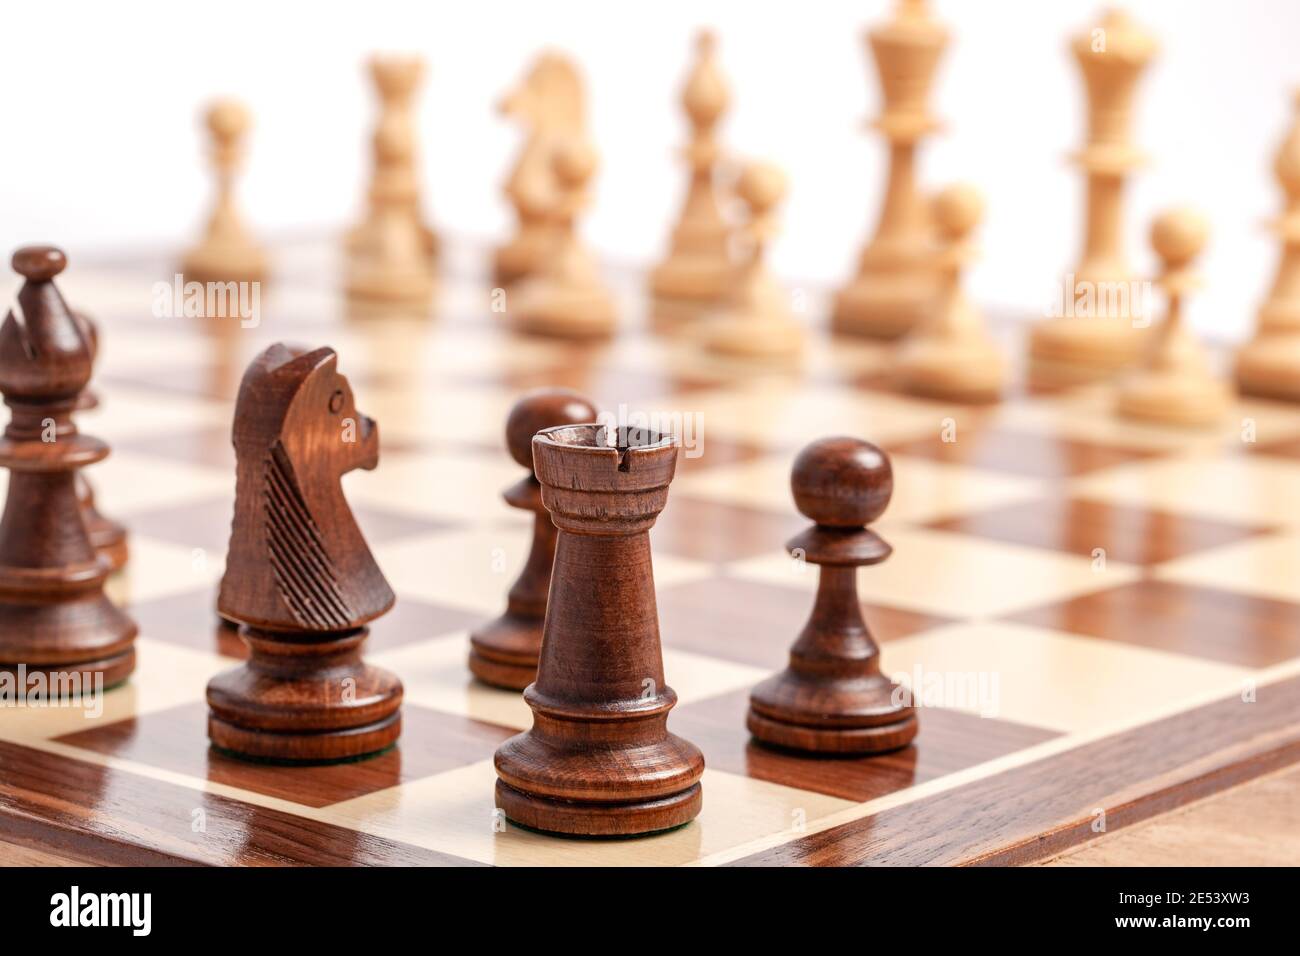 Wooden chess board with chess pieces. Wiew from the corner Stock Photo